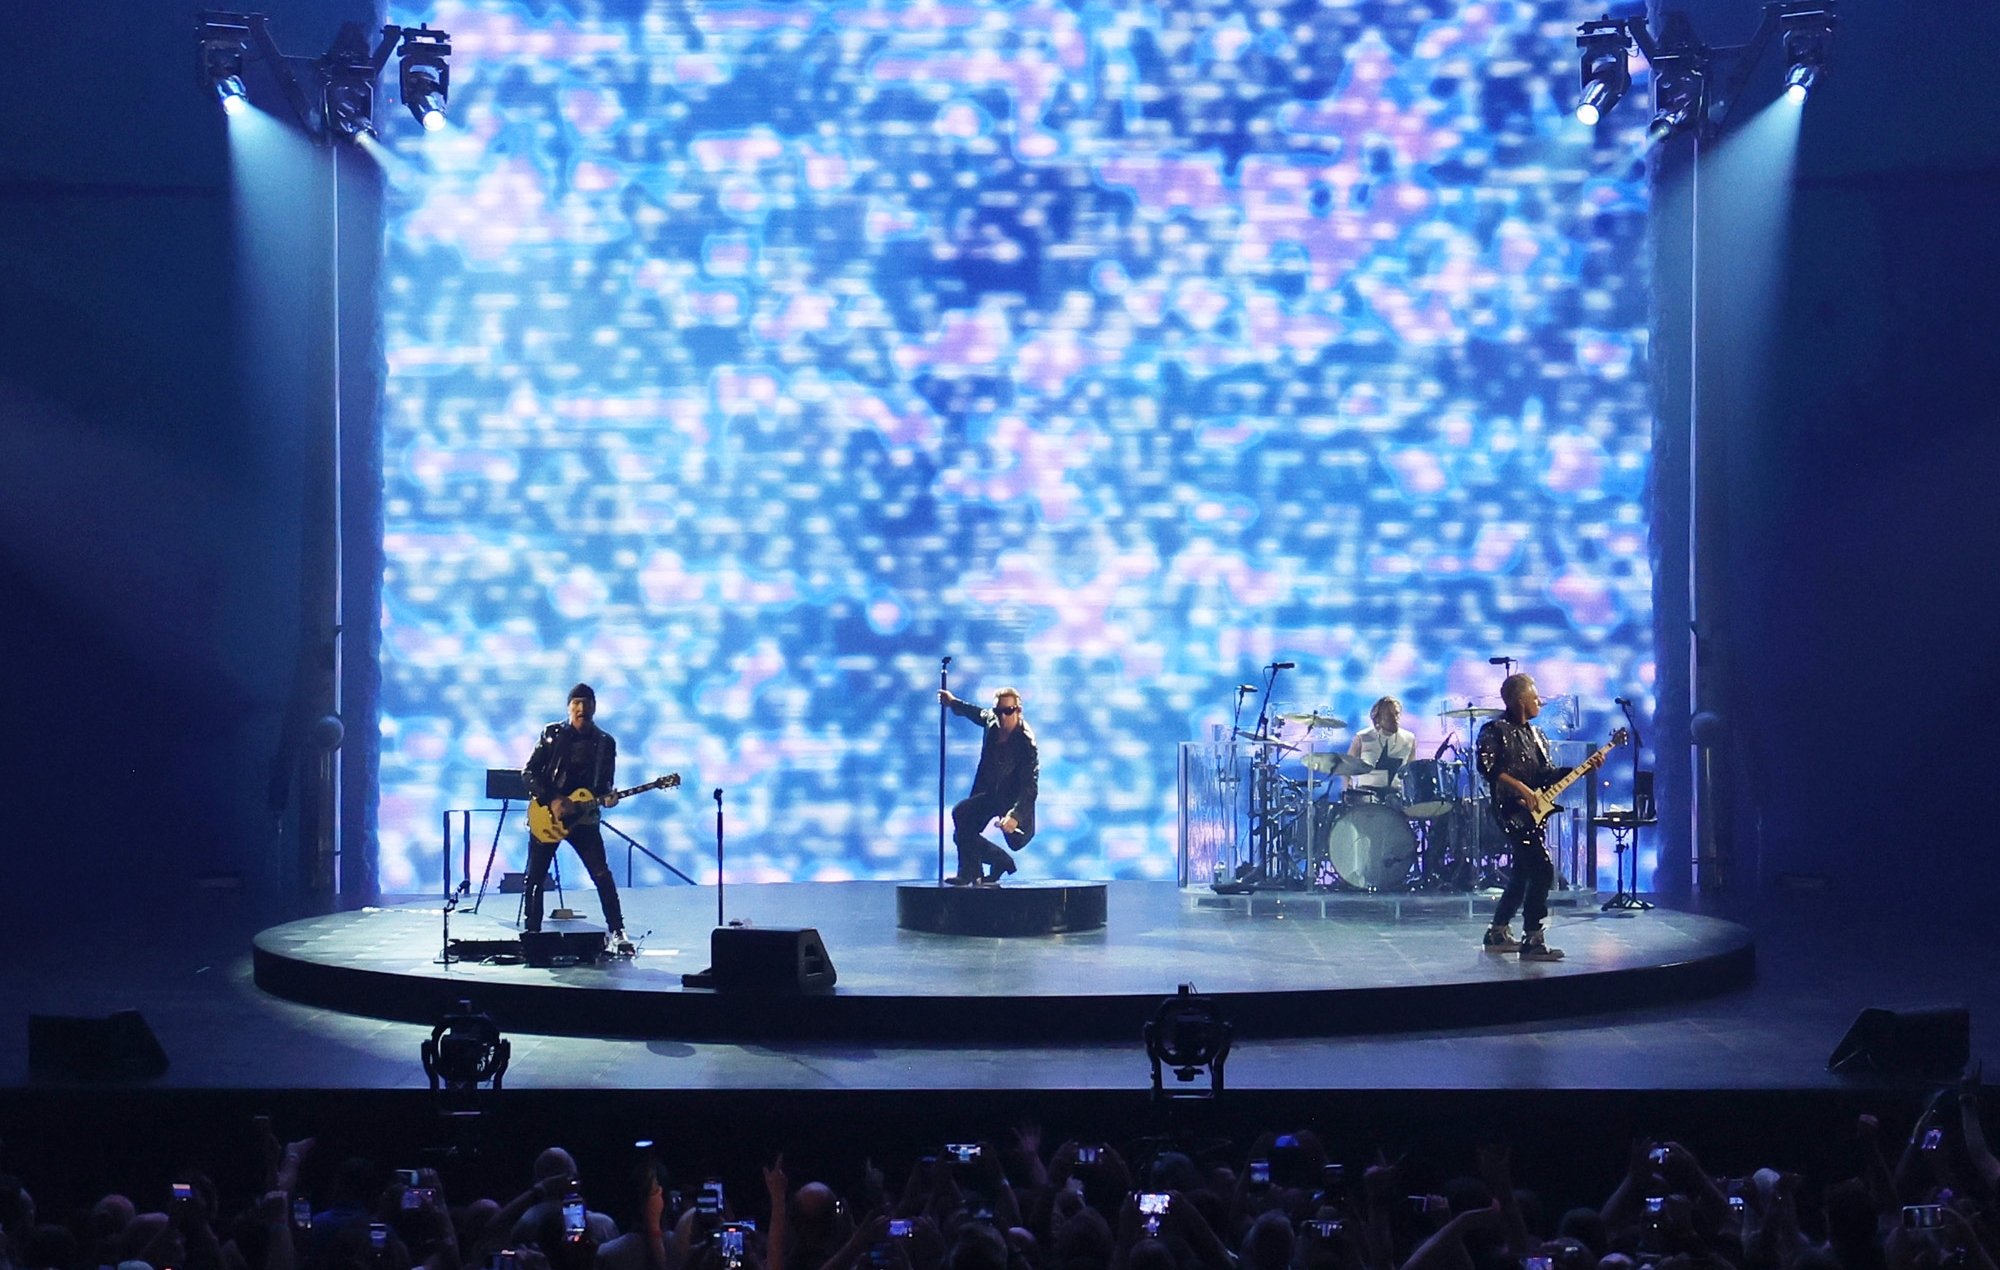 Watch U2’s video for ‘Zoo Station’ live from Las Vegas Sphere